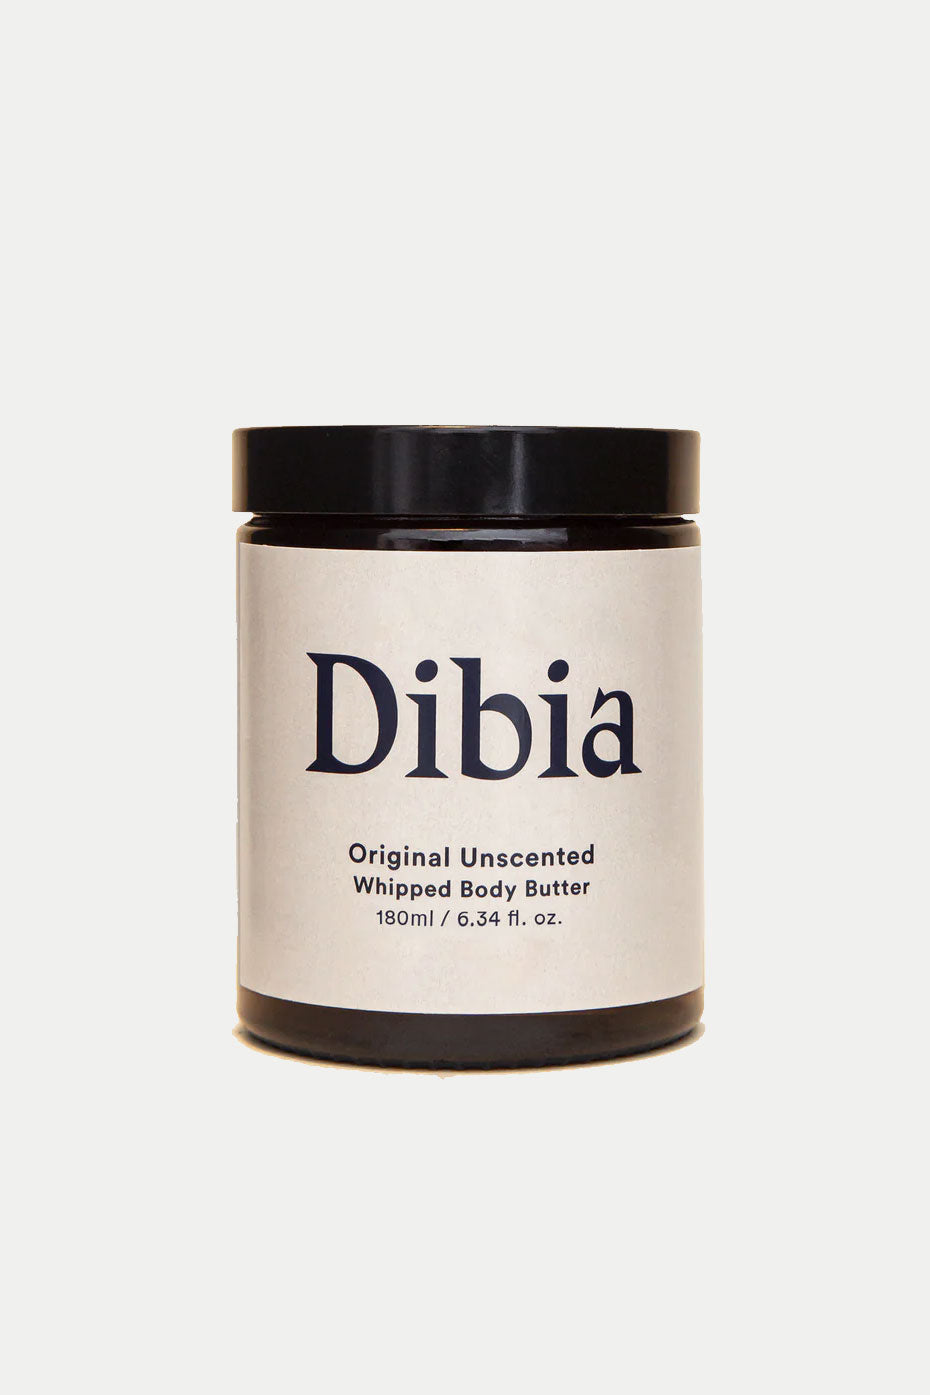 Dibia Original Unscented Whipped Body Butter 180ml